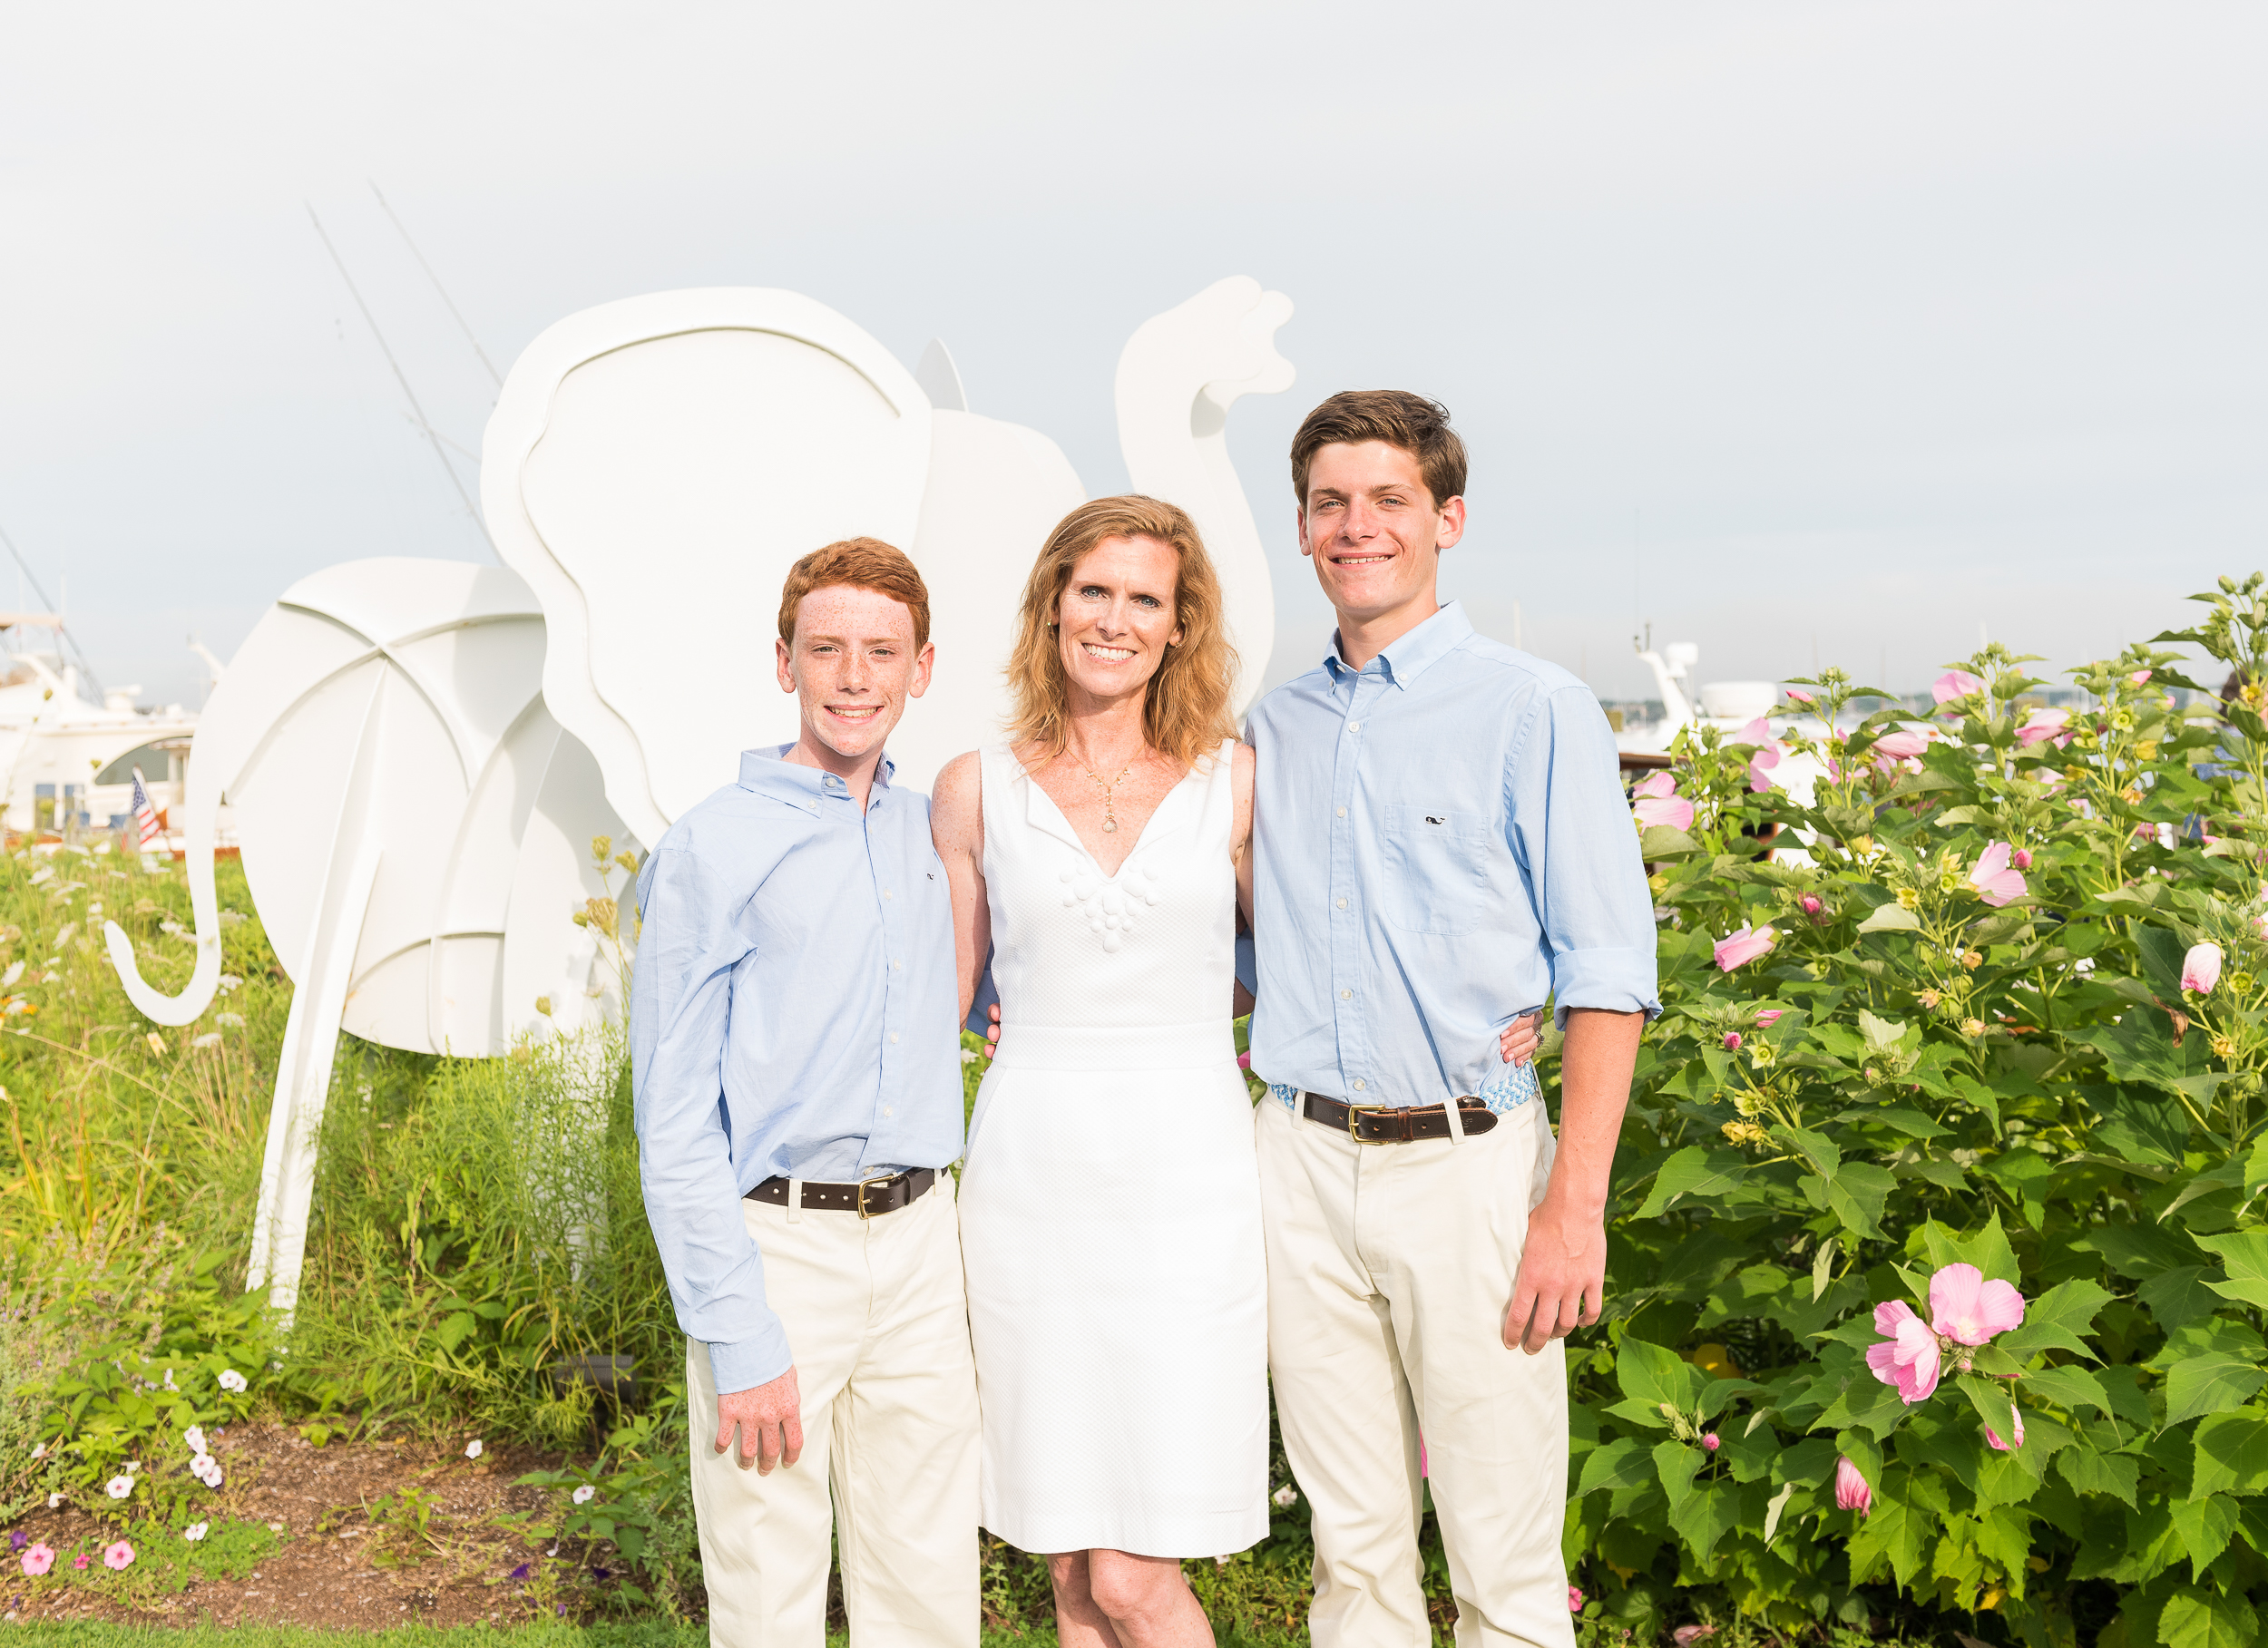 Vow Renewal at the Nantucket White Elephant